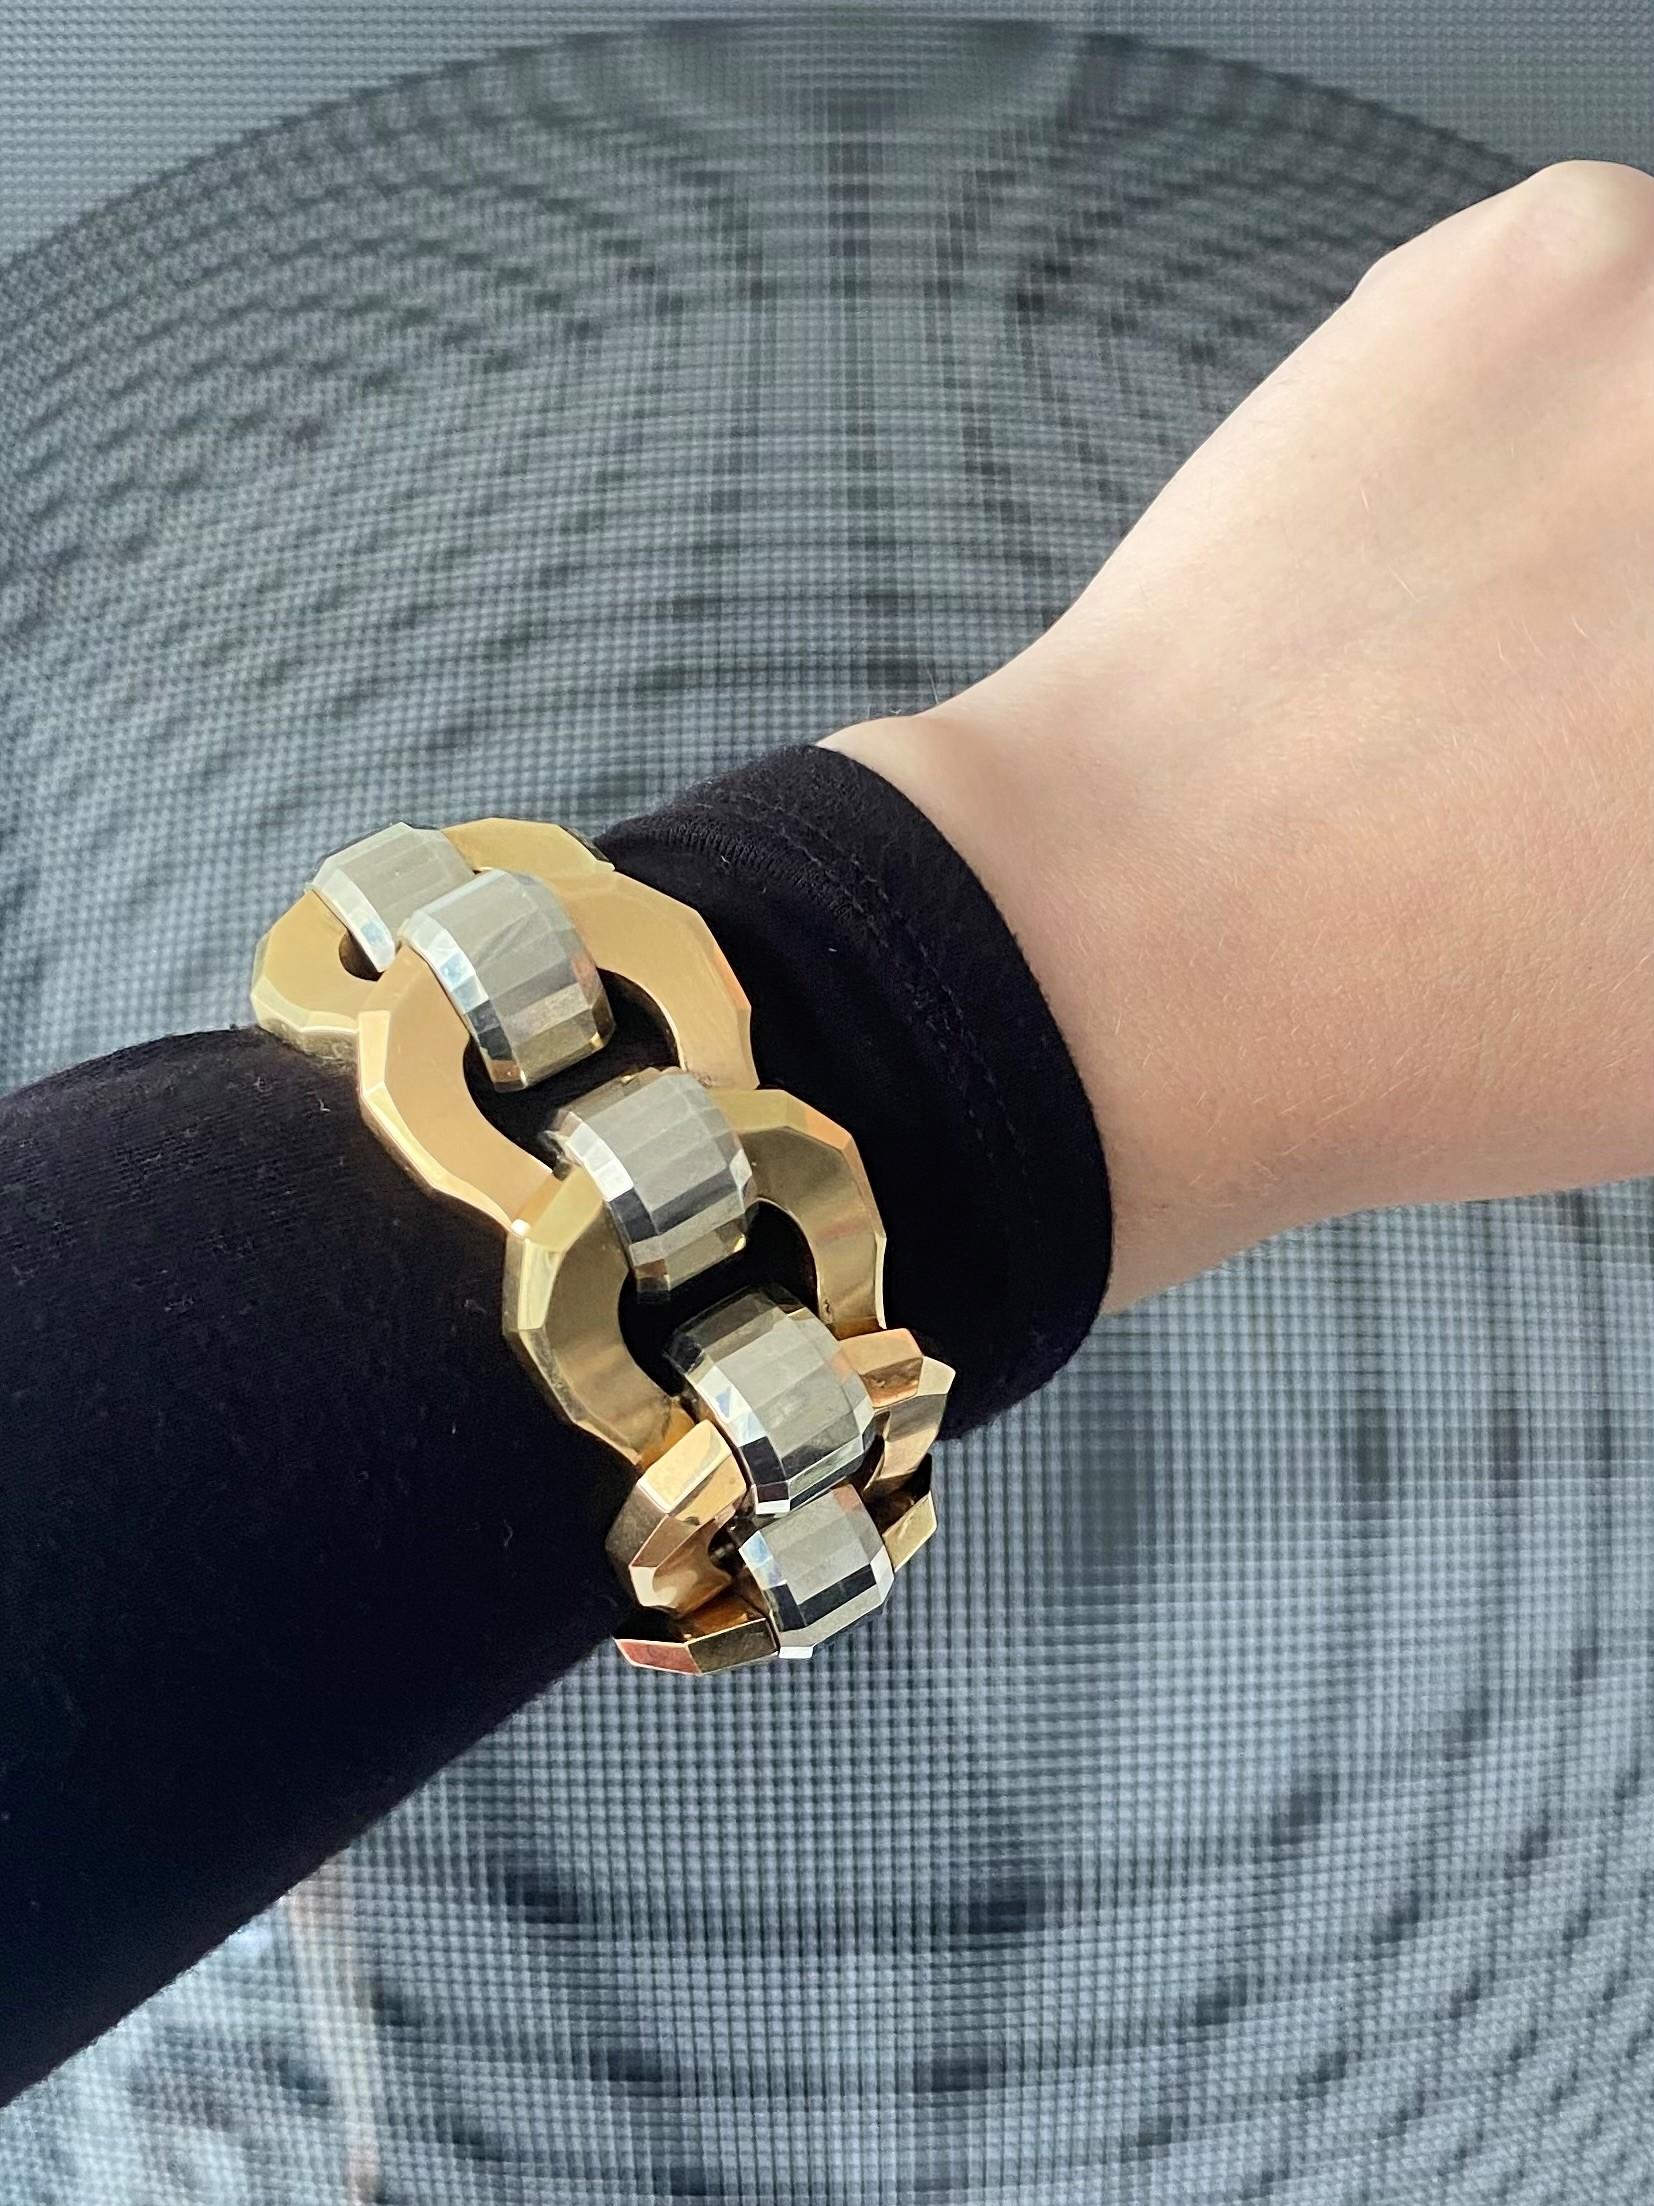 Italian art deco faceted tank bracelet.

Description: Beautiful bold piece, created in Italy during the art deco period, back in the 1930's. This tank bracelet has been crafted with faceted patterns in solid yellow and white gold of 18 karats with